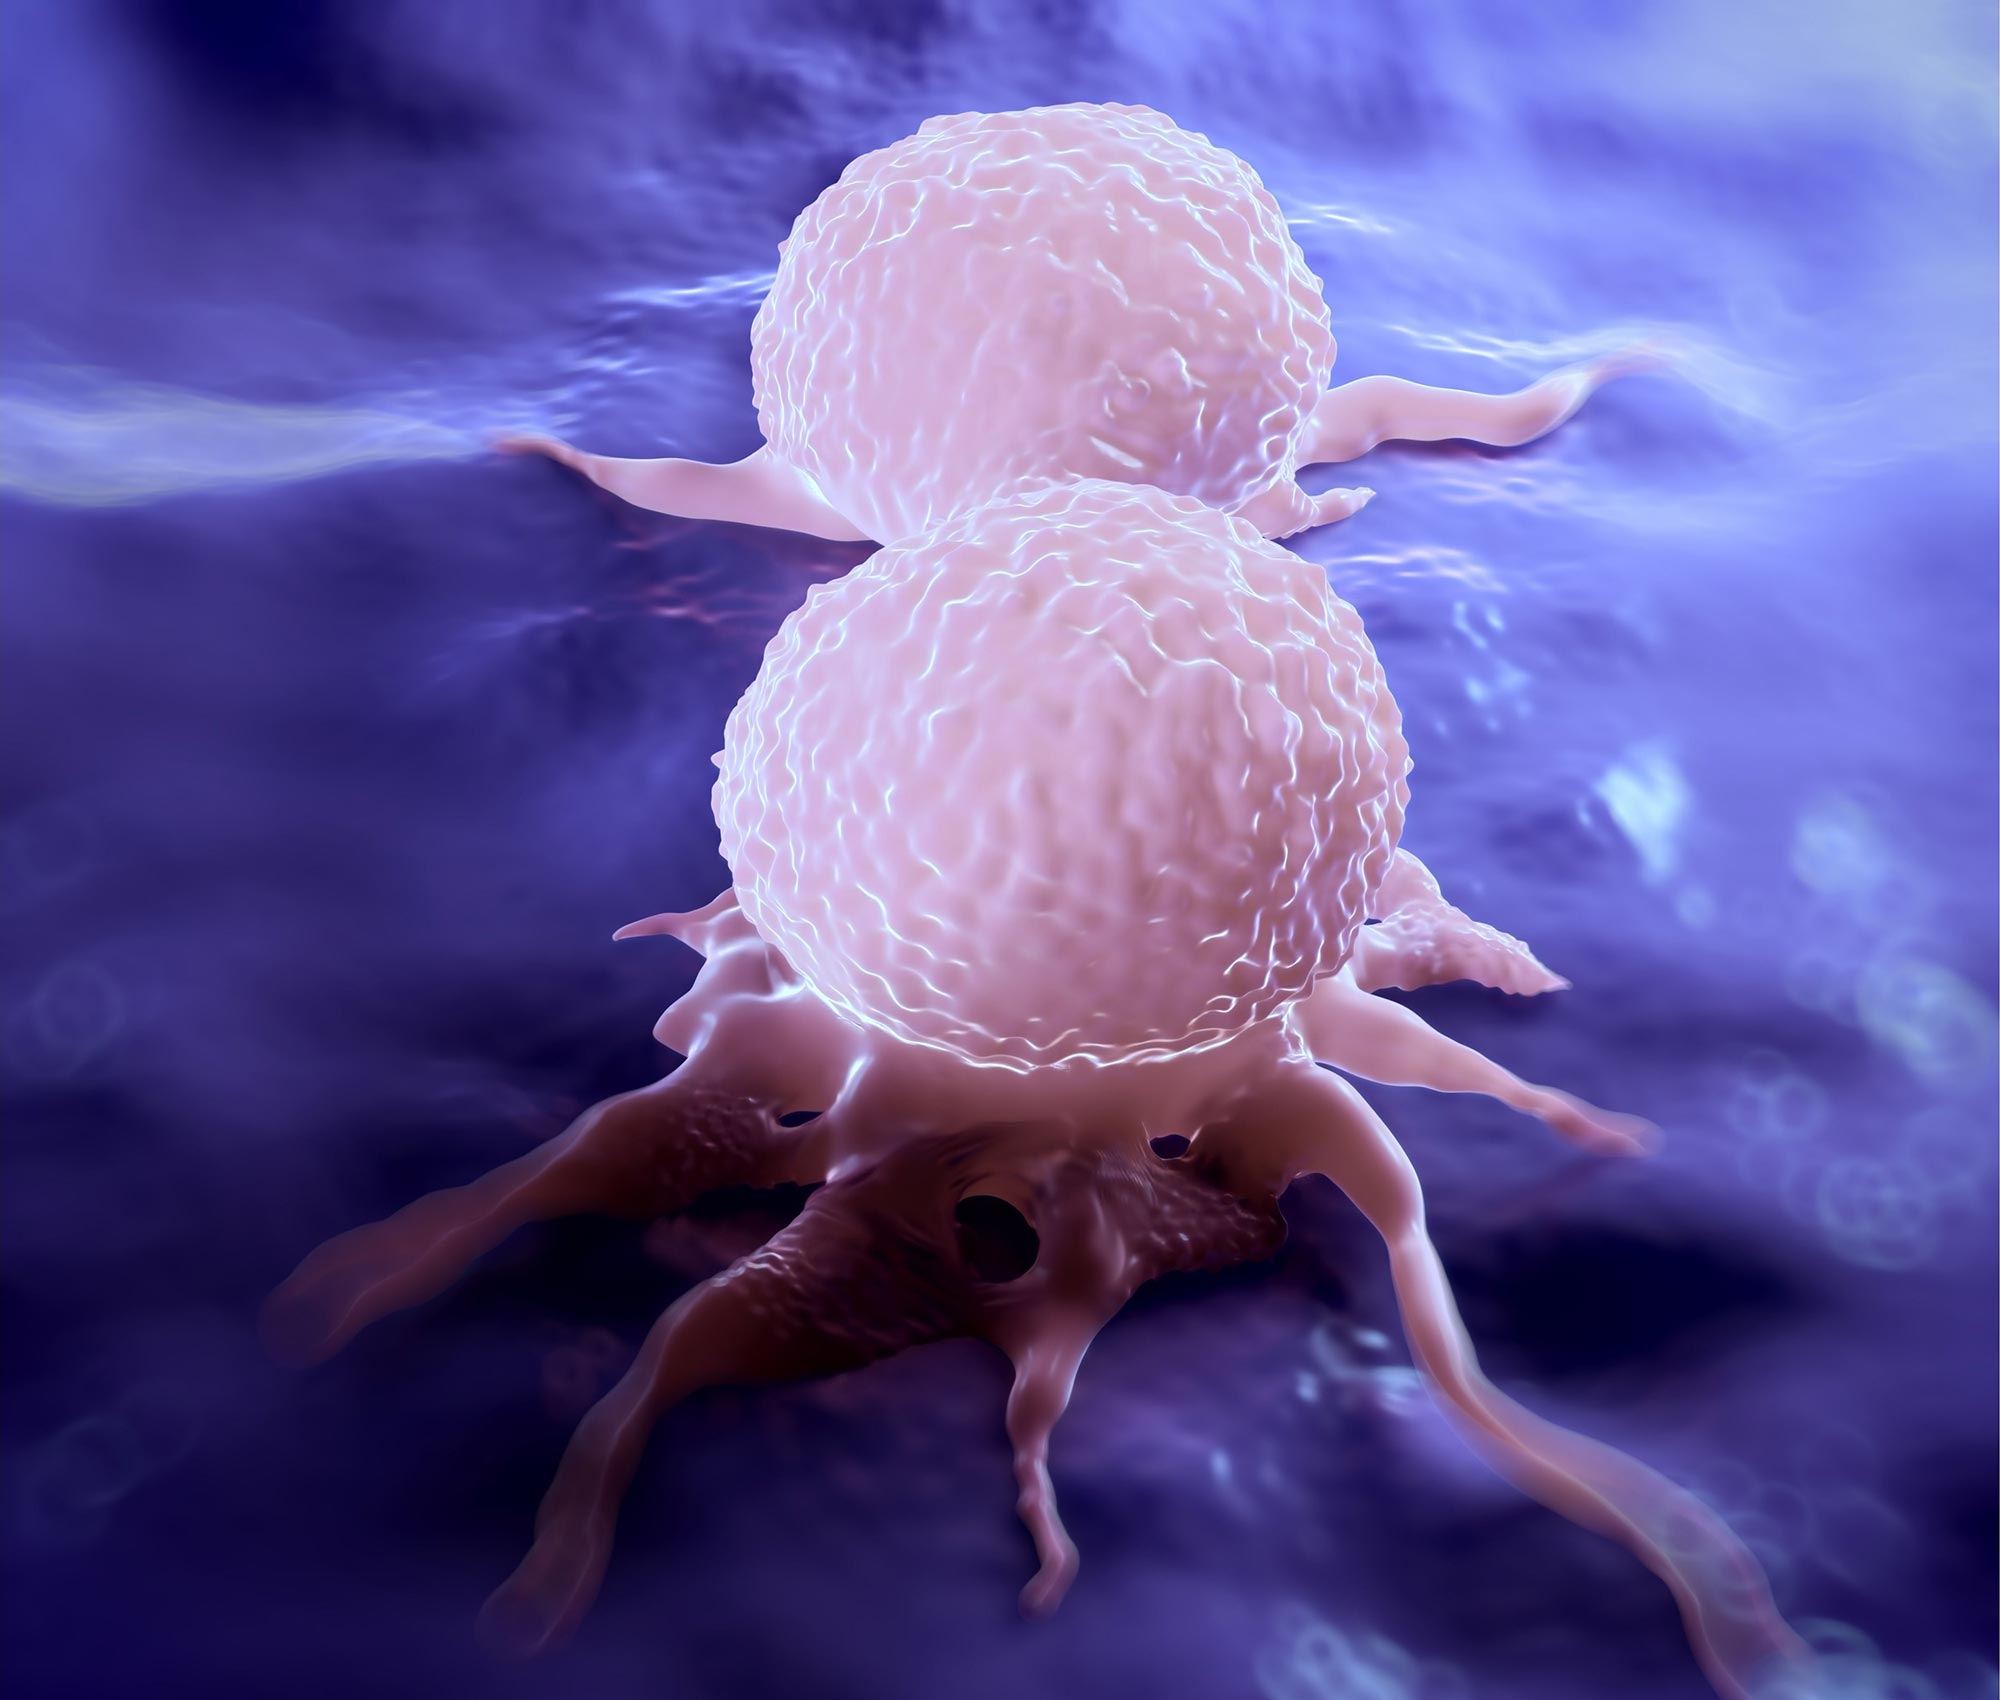 Why Doesn't Immunotherapy Work for All Breast Cancers? - SciTechDaily